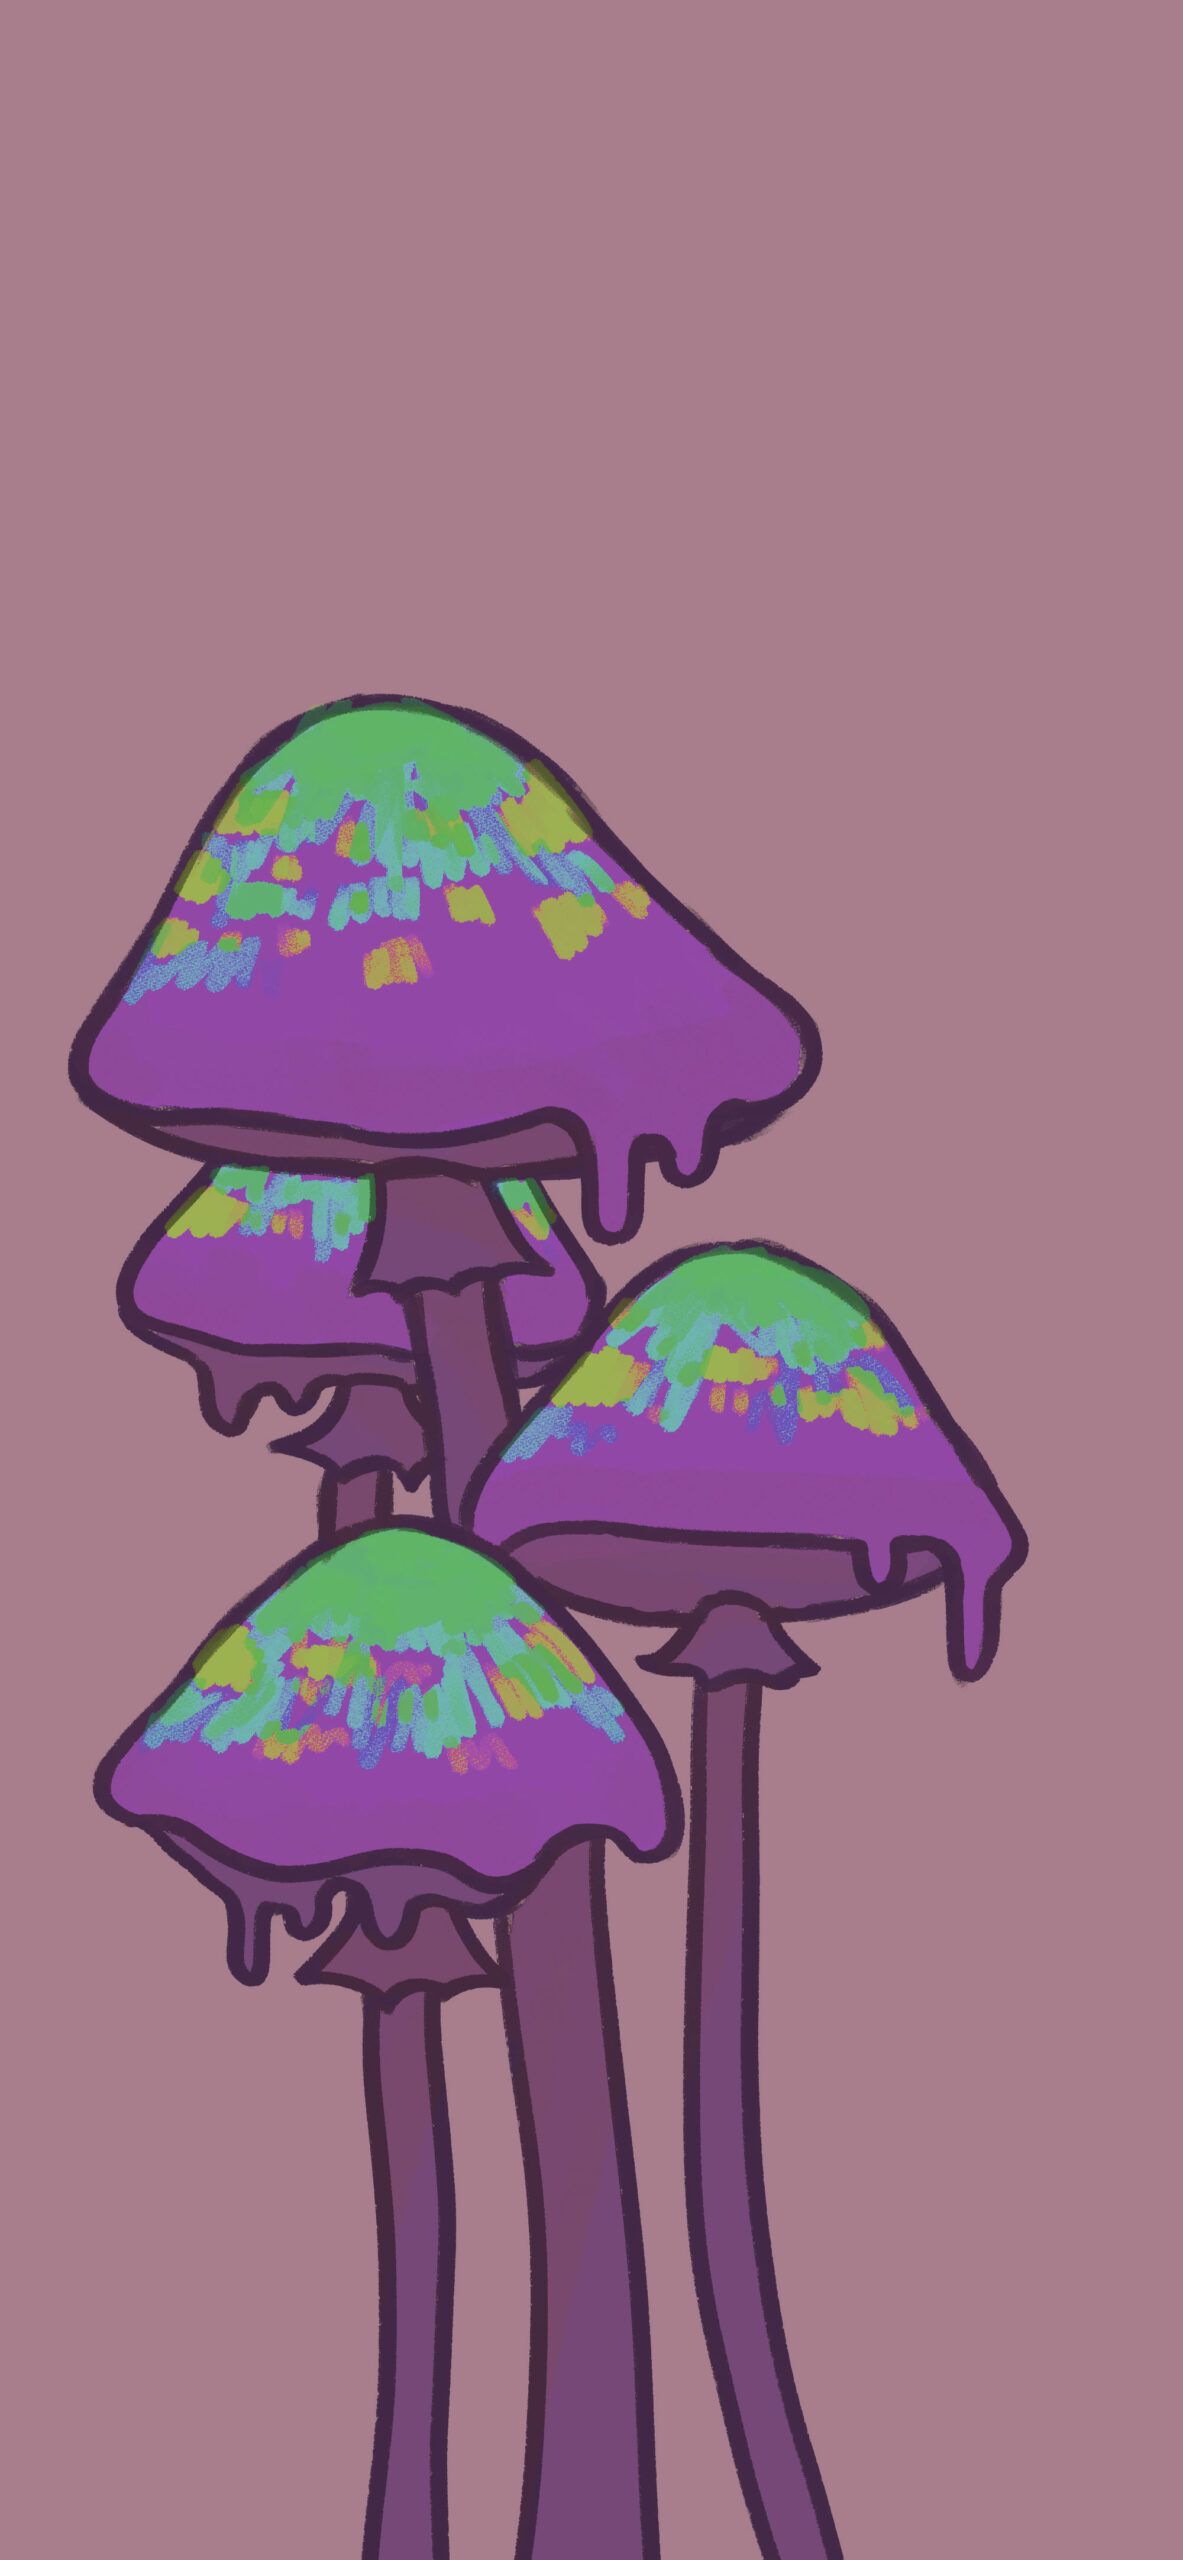 A drawing of a group of mushrooms - Trippy